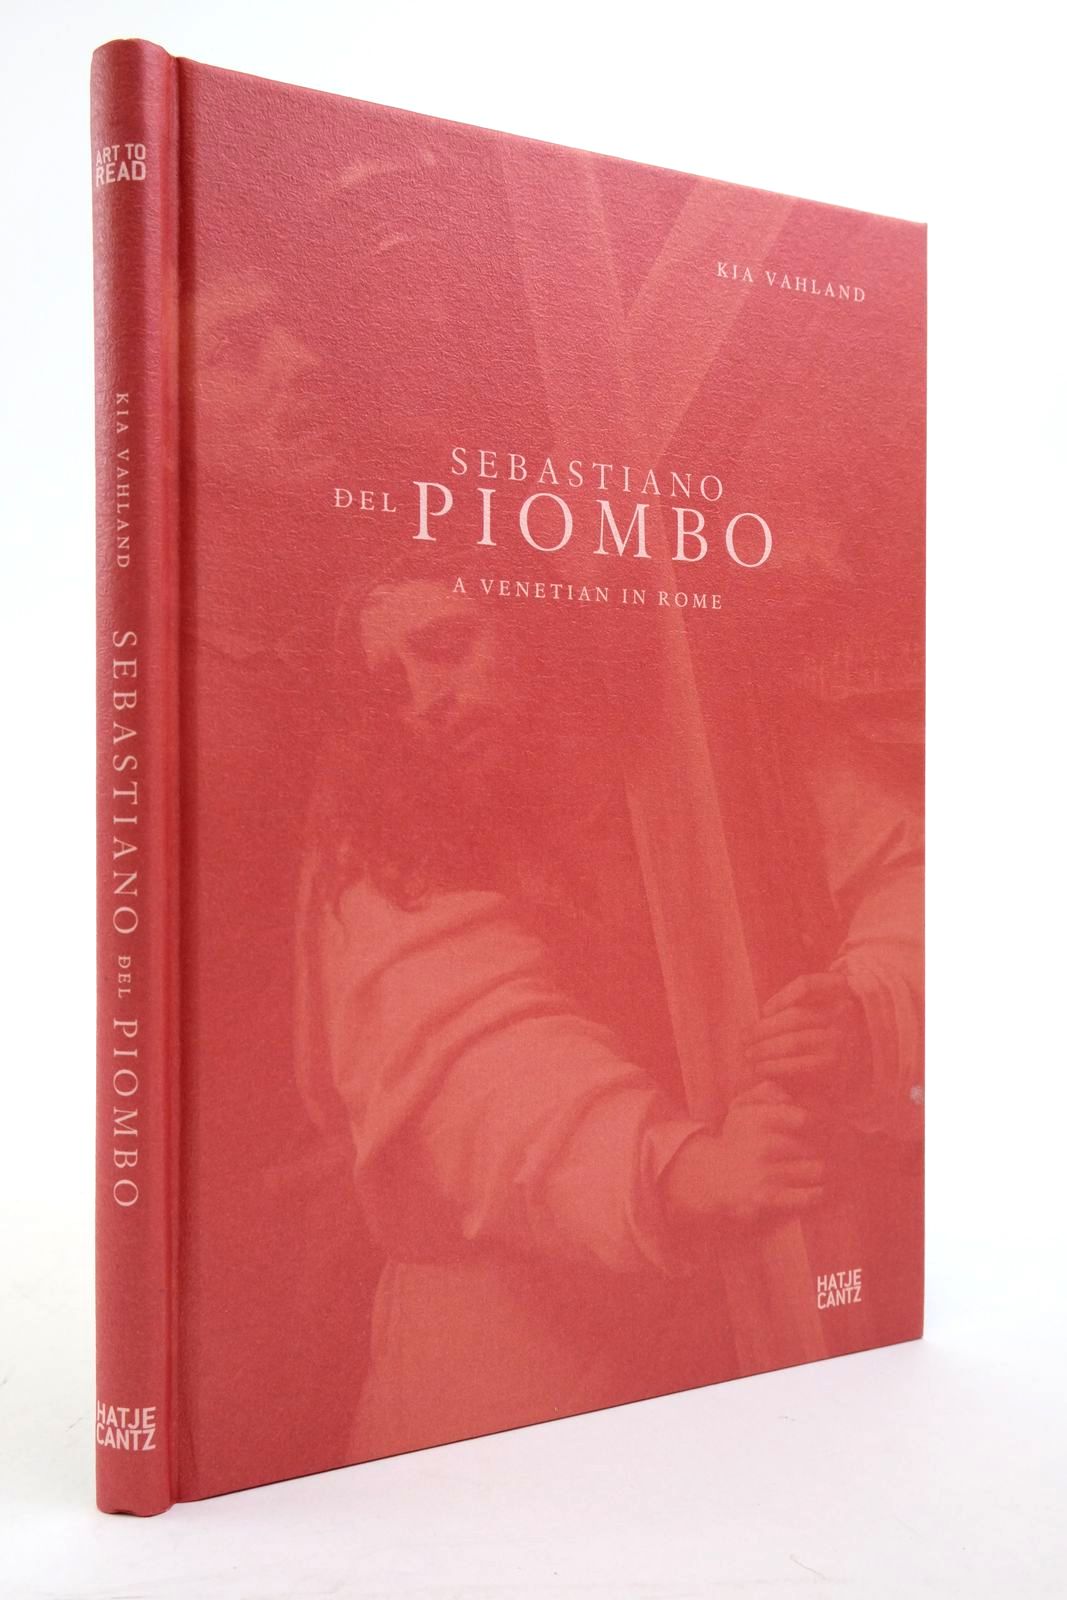 Photo of SEBASTIANO DEL PIOMBO: A VENETIAN IN ROME written by Vahland, Kia illustrated by Del Piombo, Sebastiano published by Hatje Cantz Verlag (STOCK CODE: 2138961)  for sale by Stella & Rose's Books